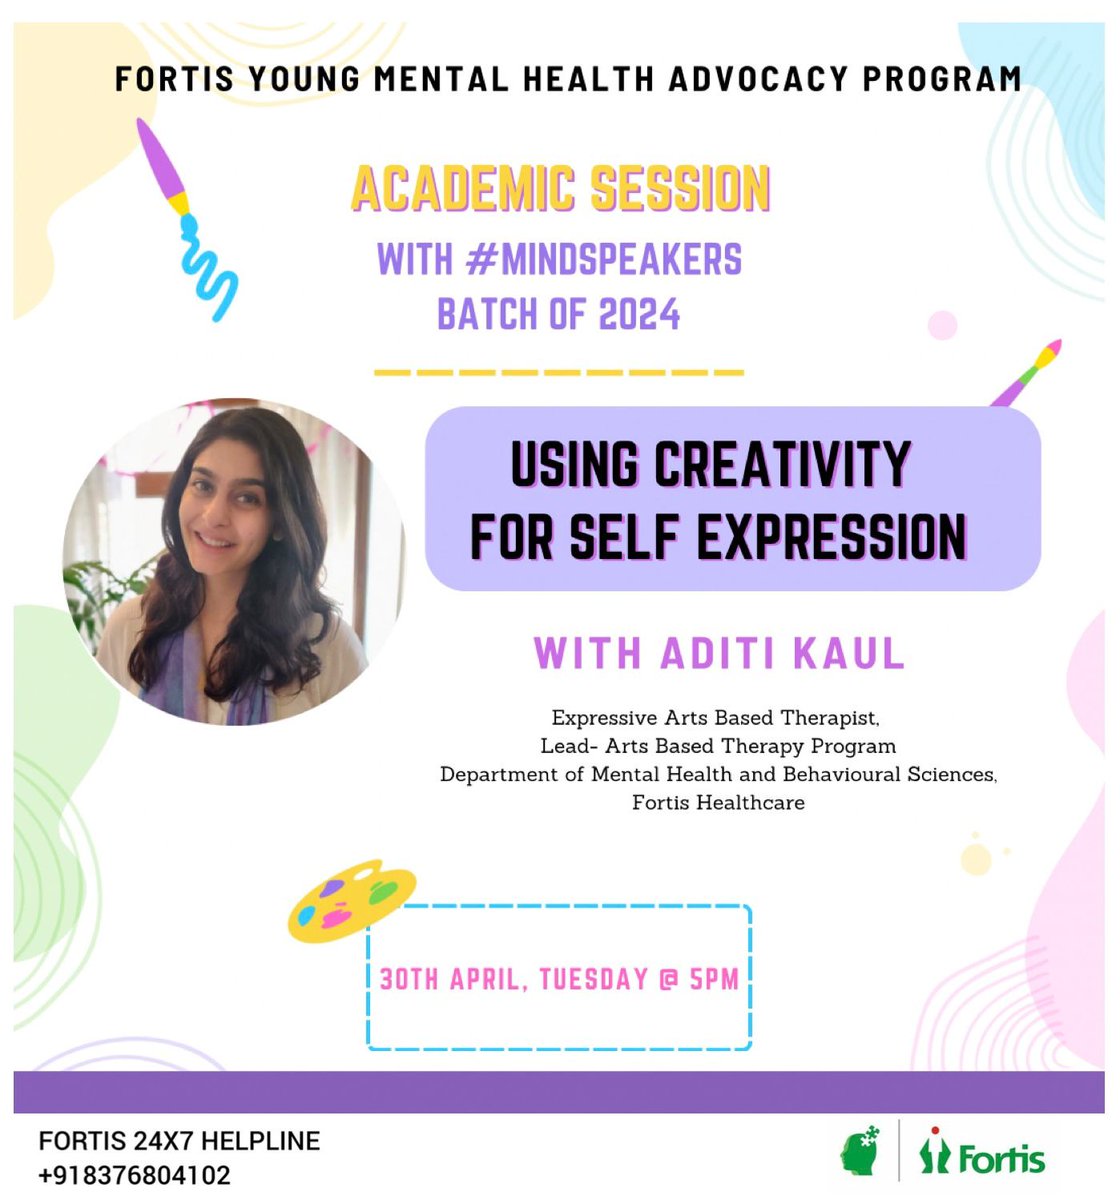 Fortis Young Mental Health Advocacy Program-
Session on ‘Using Creativity for Self-Expression’ by @AditiKaul1 with the #MindSpeakers - Batch of 2024
30th April, Tuesday, 5pm 

#mindspace
#mentalhealth #advocacy

@dr_samirparikh
@fortis_hospital